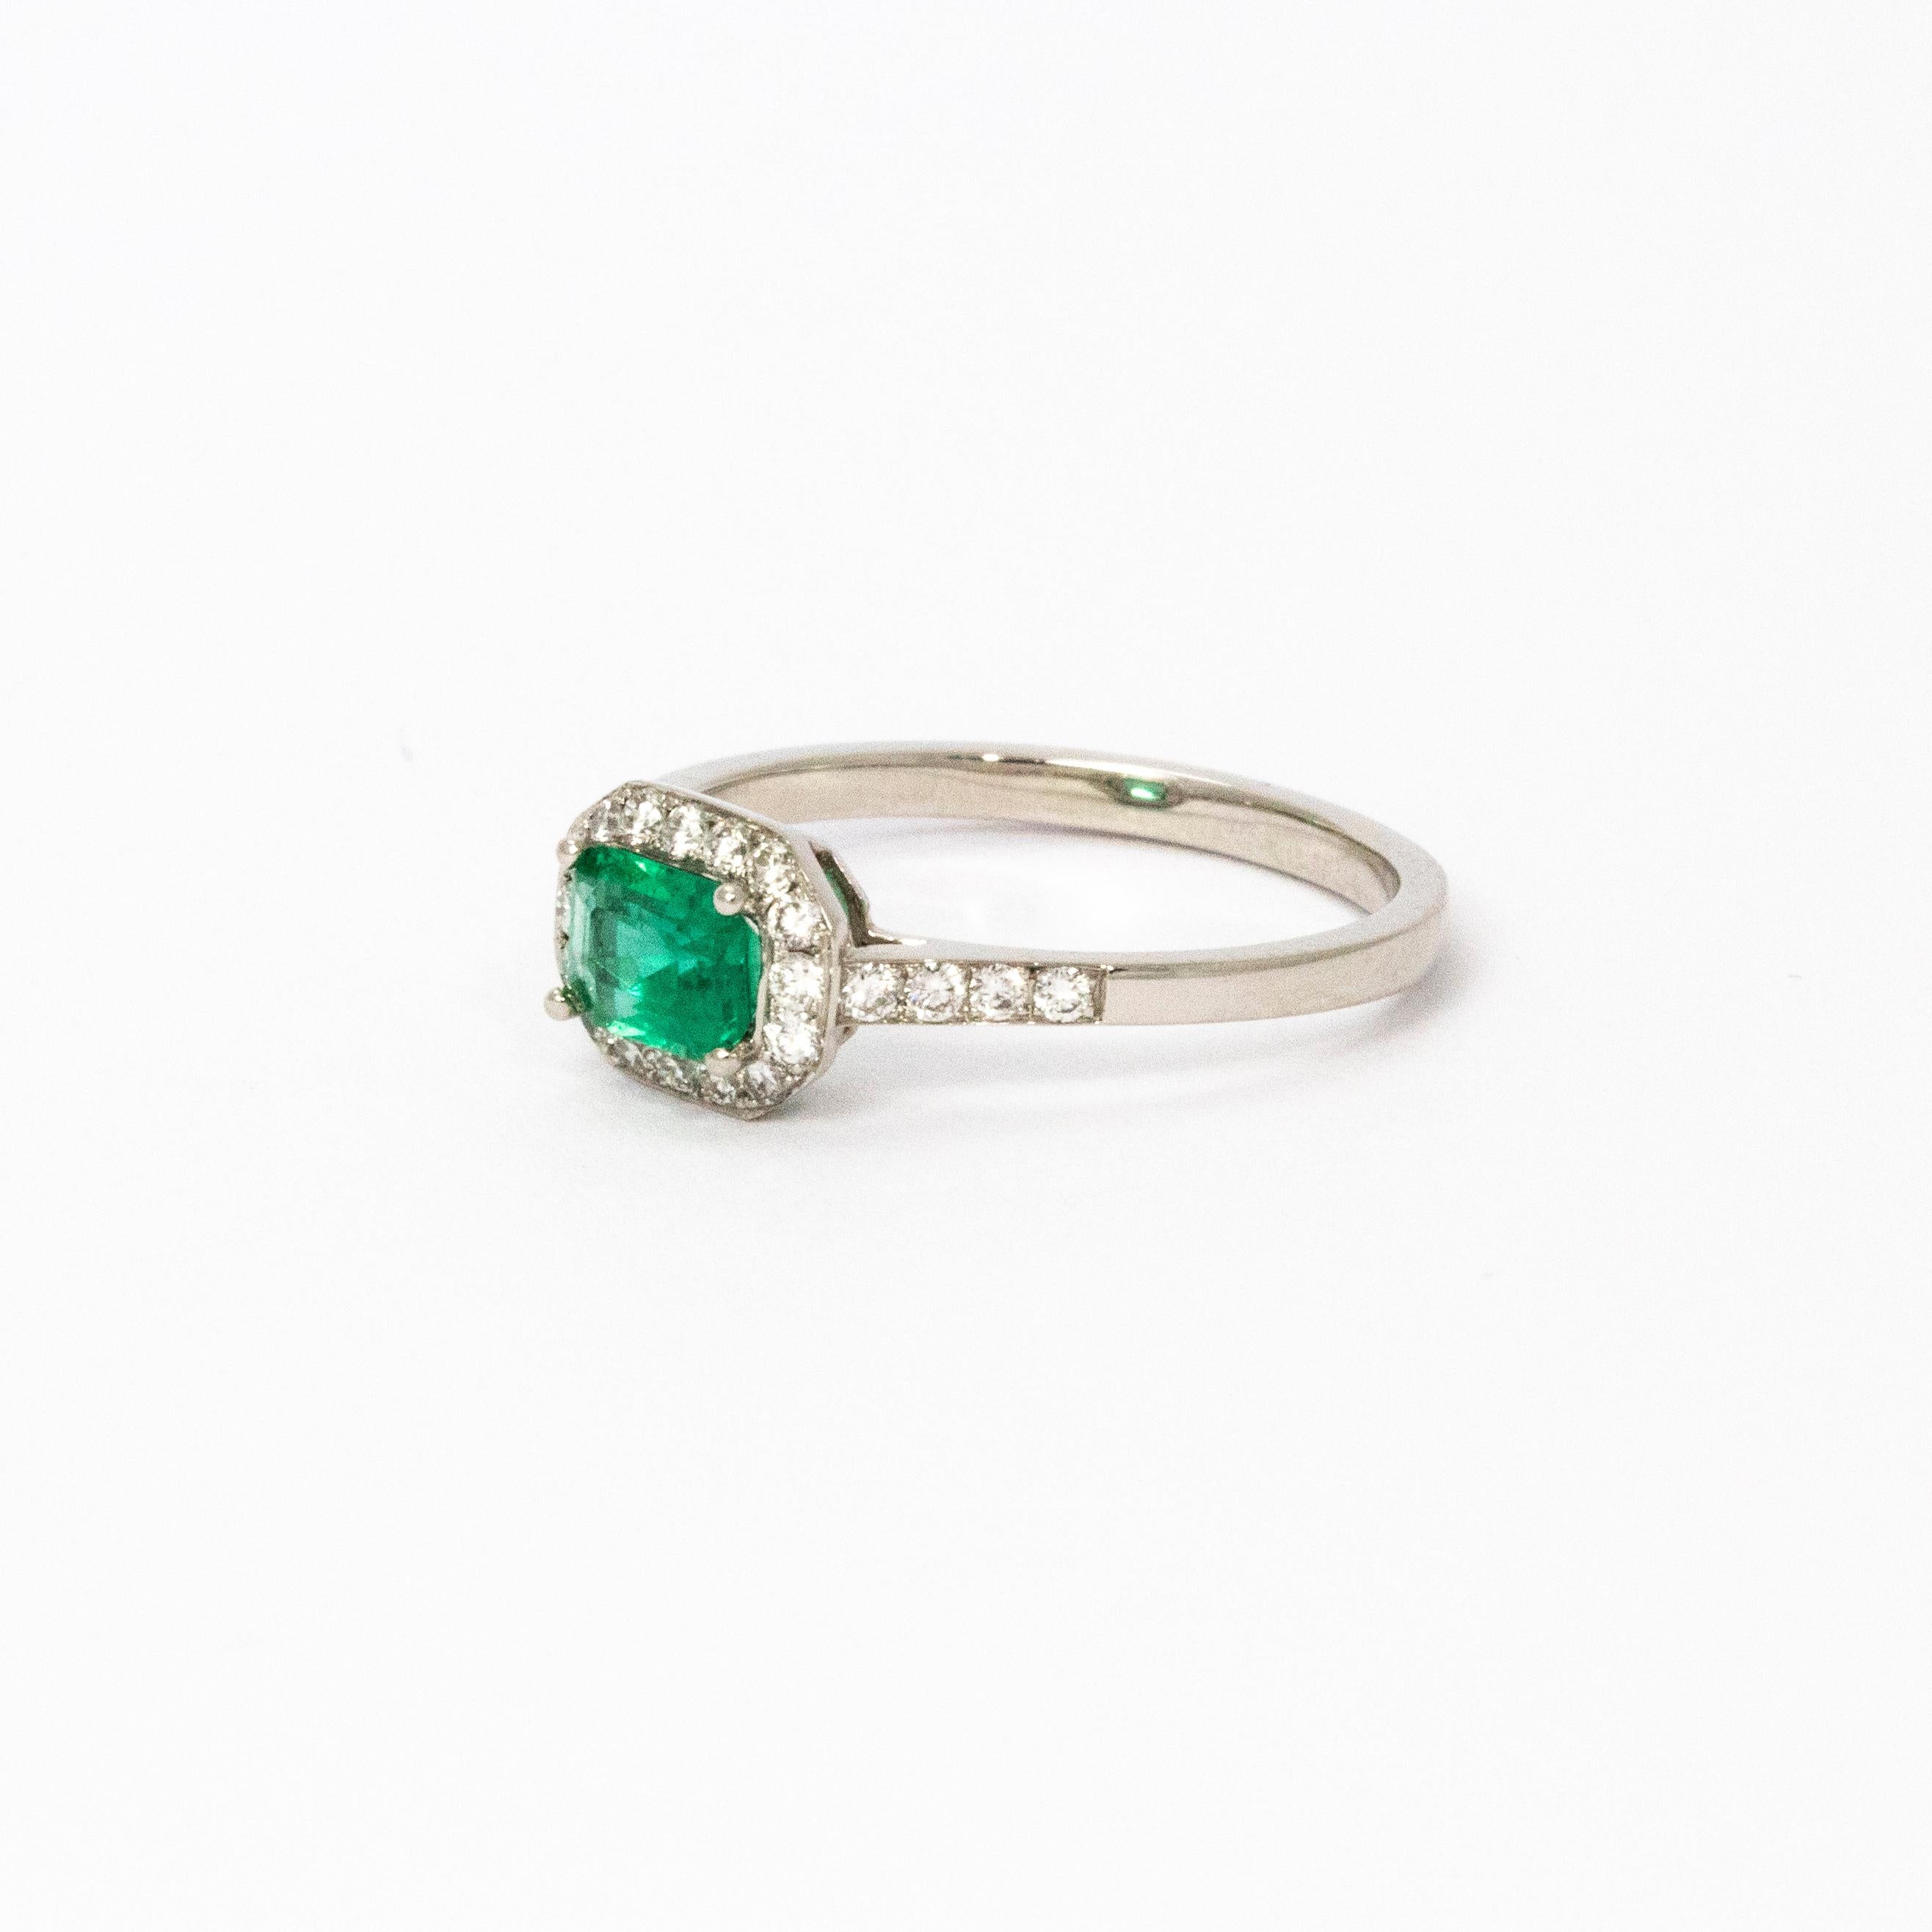 A beautiful 1960s ring. Centrally set is a certified 0.63 carat green emerald with impeccable colour. Around the central stone is a wonderful halo of bright brilliant cut diamonds which extend across the shoulders. Total diamond weight certified 45